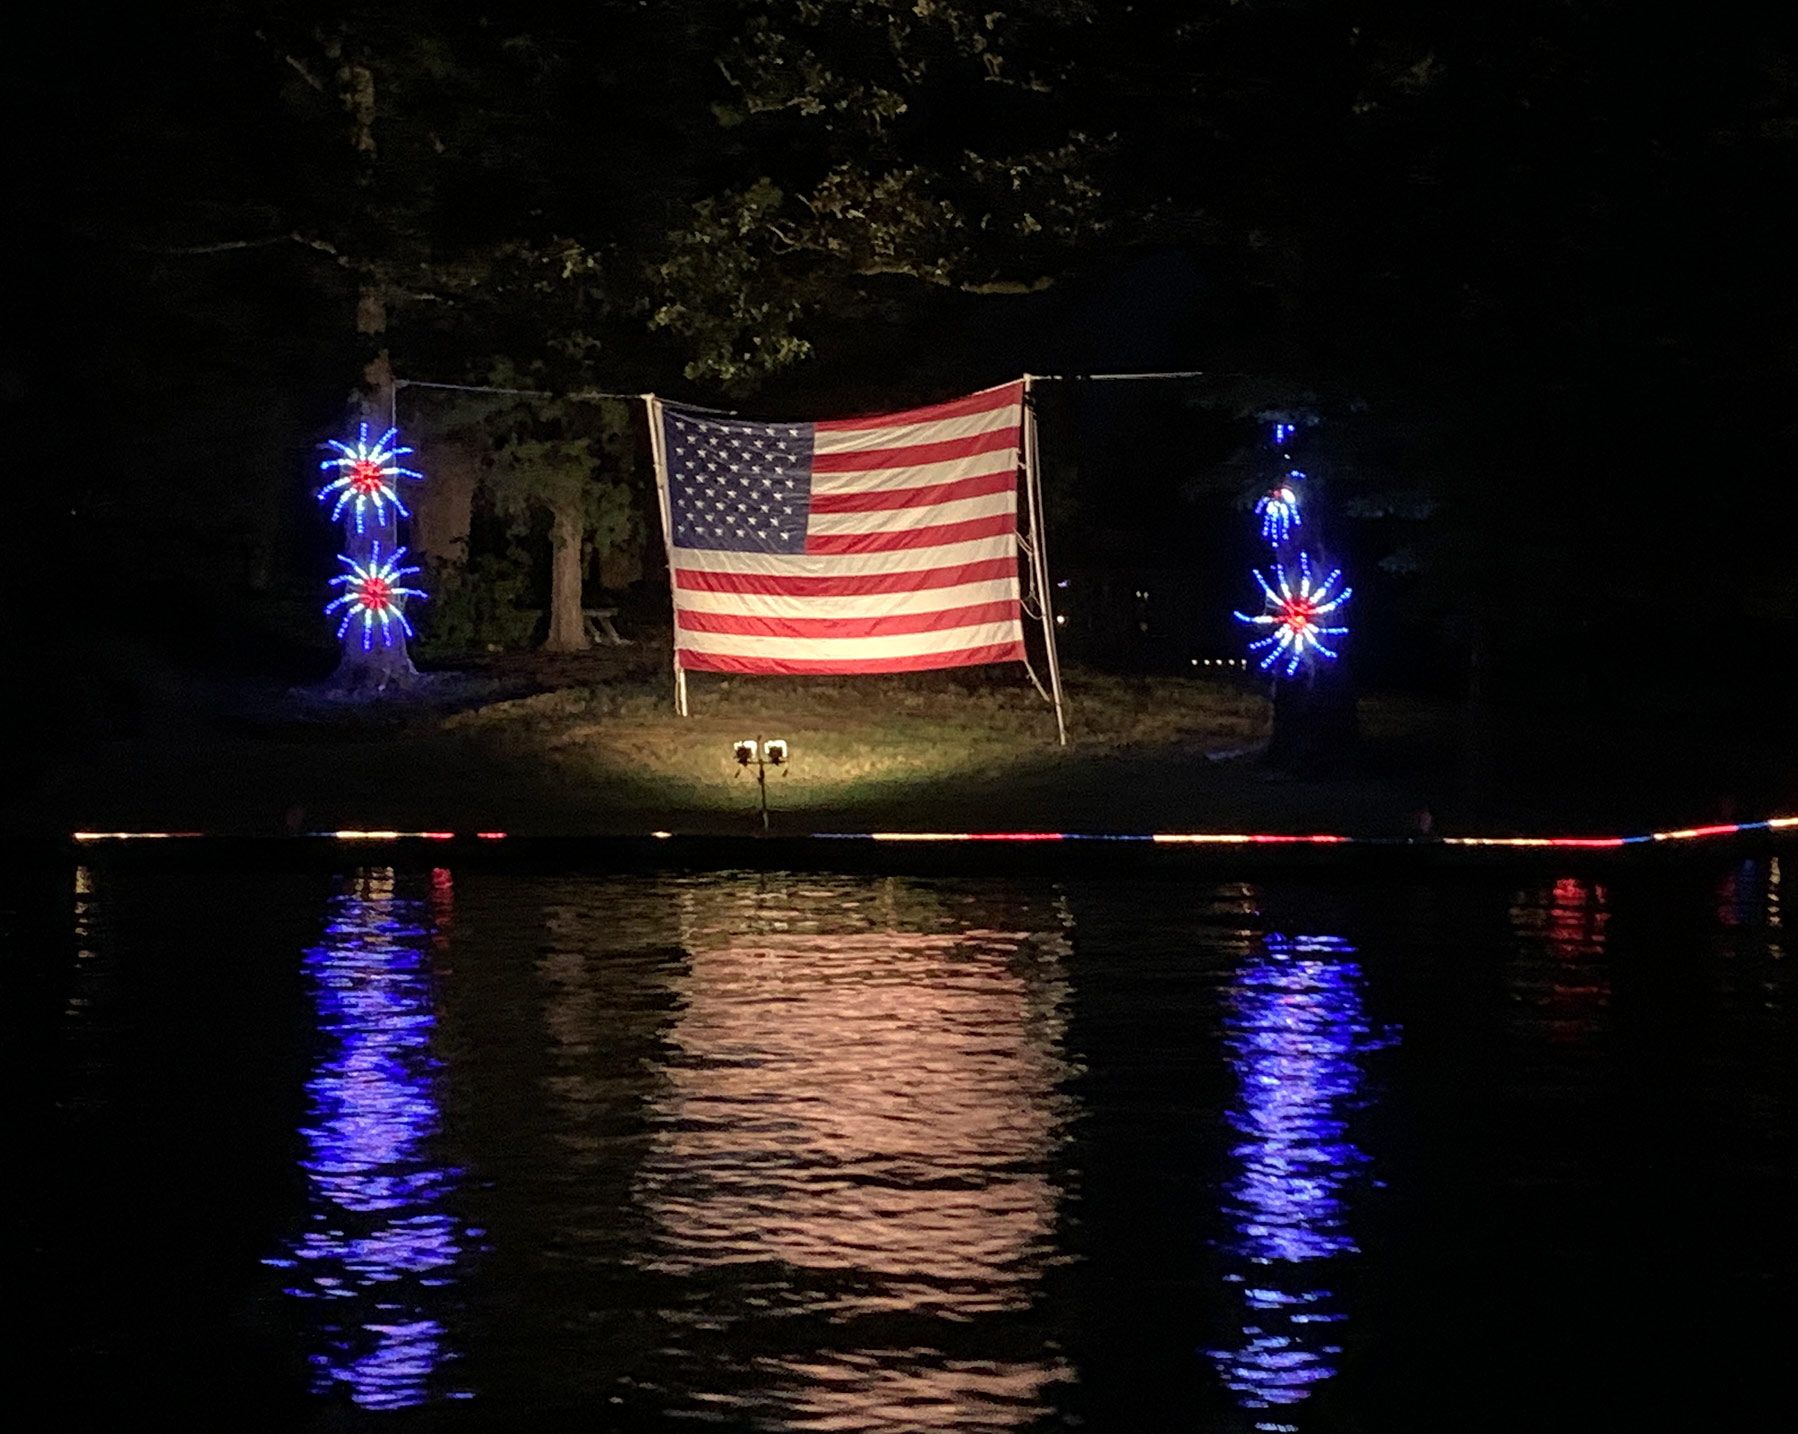 A Fourth of July display with a flag